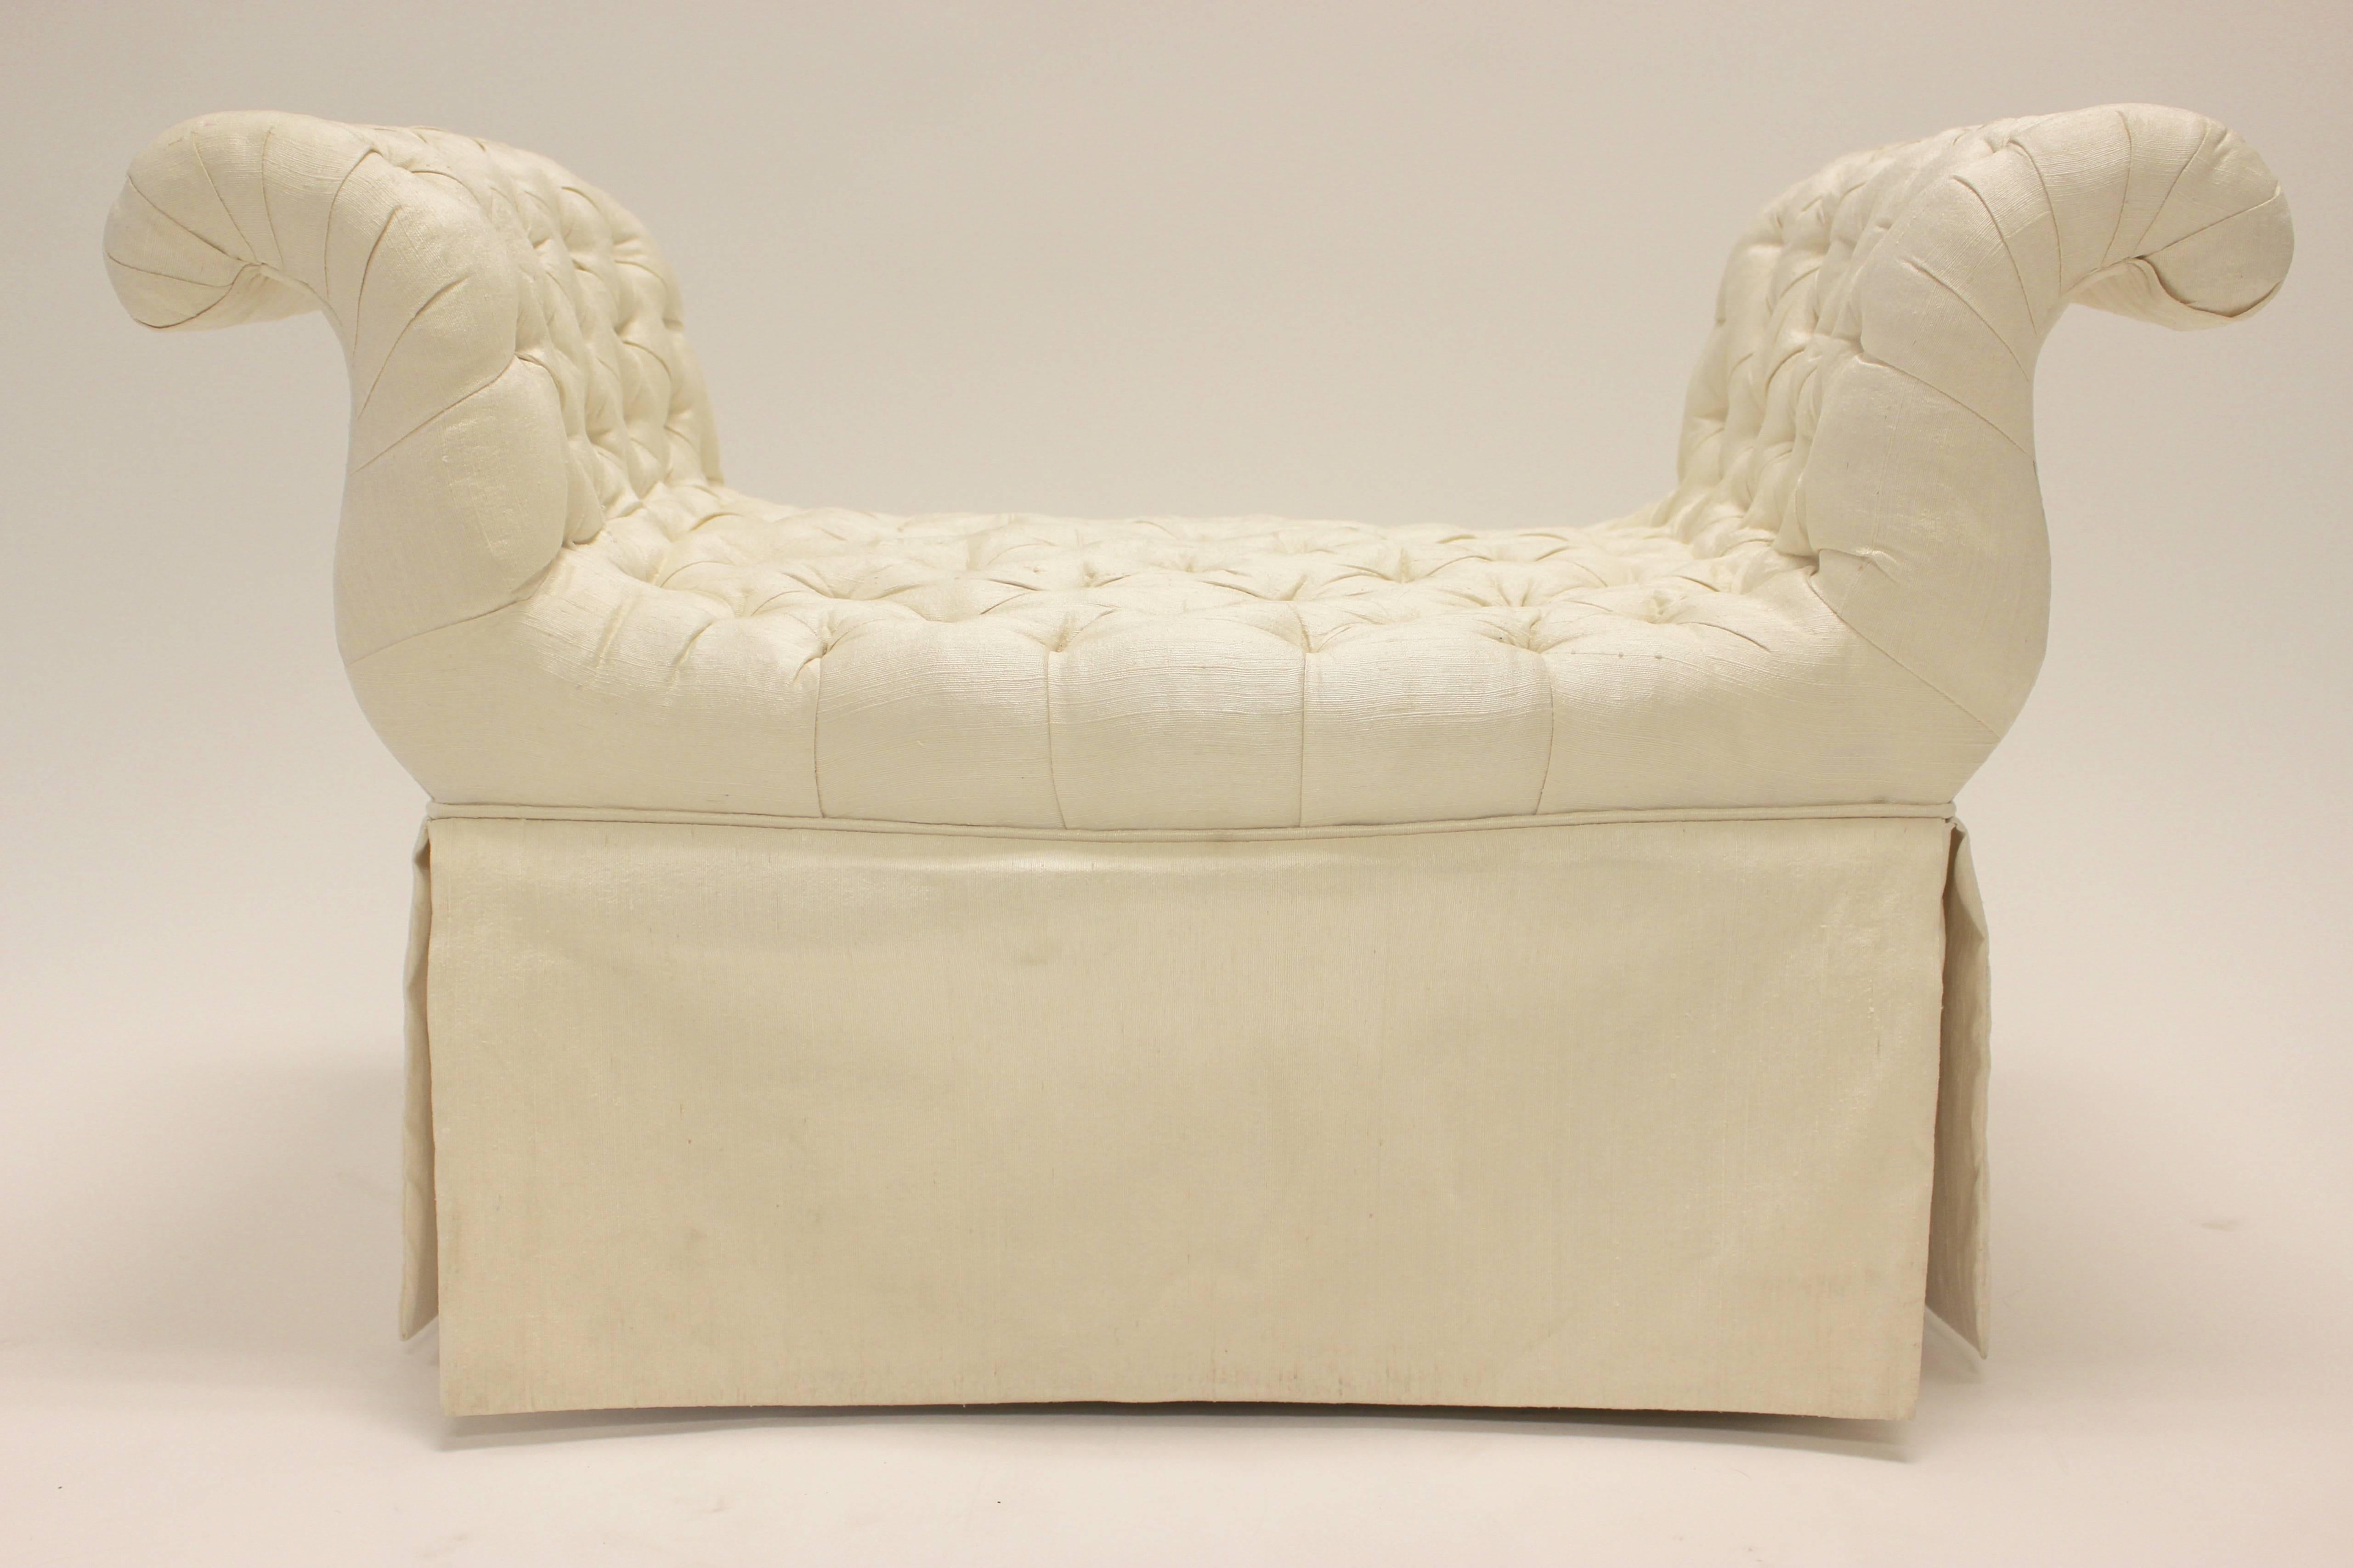 Pair of Cream-Colored Silk Button-Tufted Rolled Arm Benches with Ample Skirt In Good Condition For Sale In Palm Desert, CA